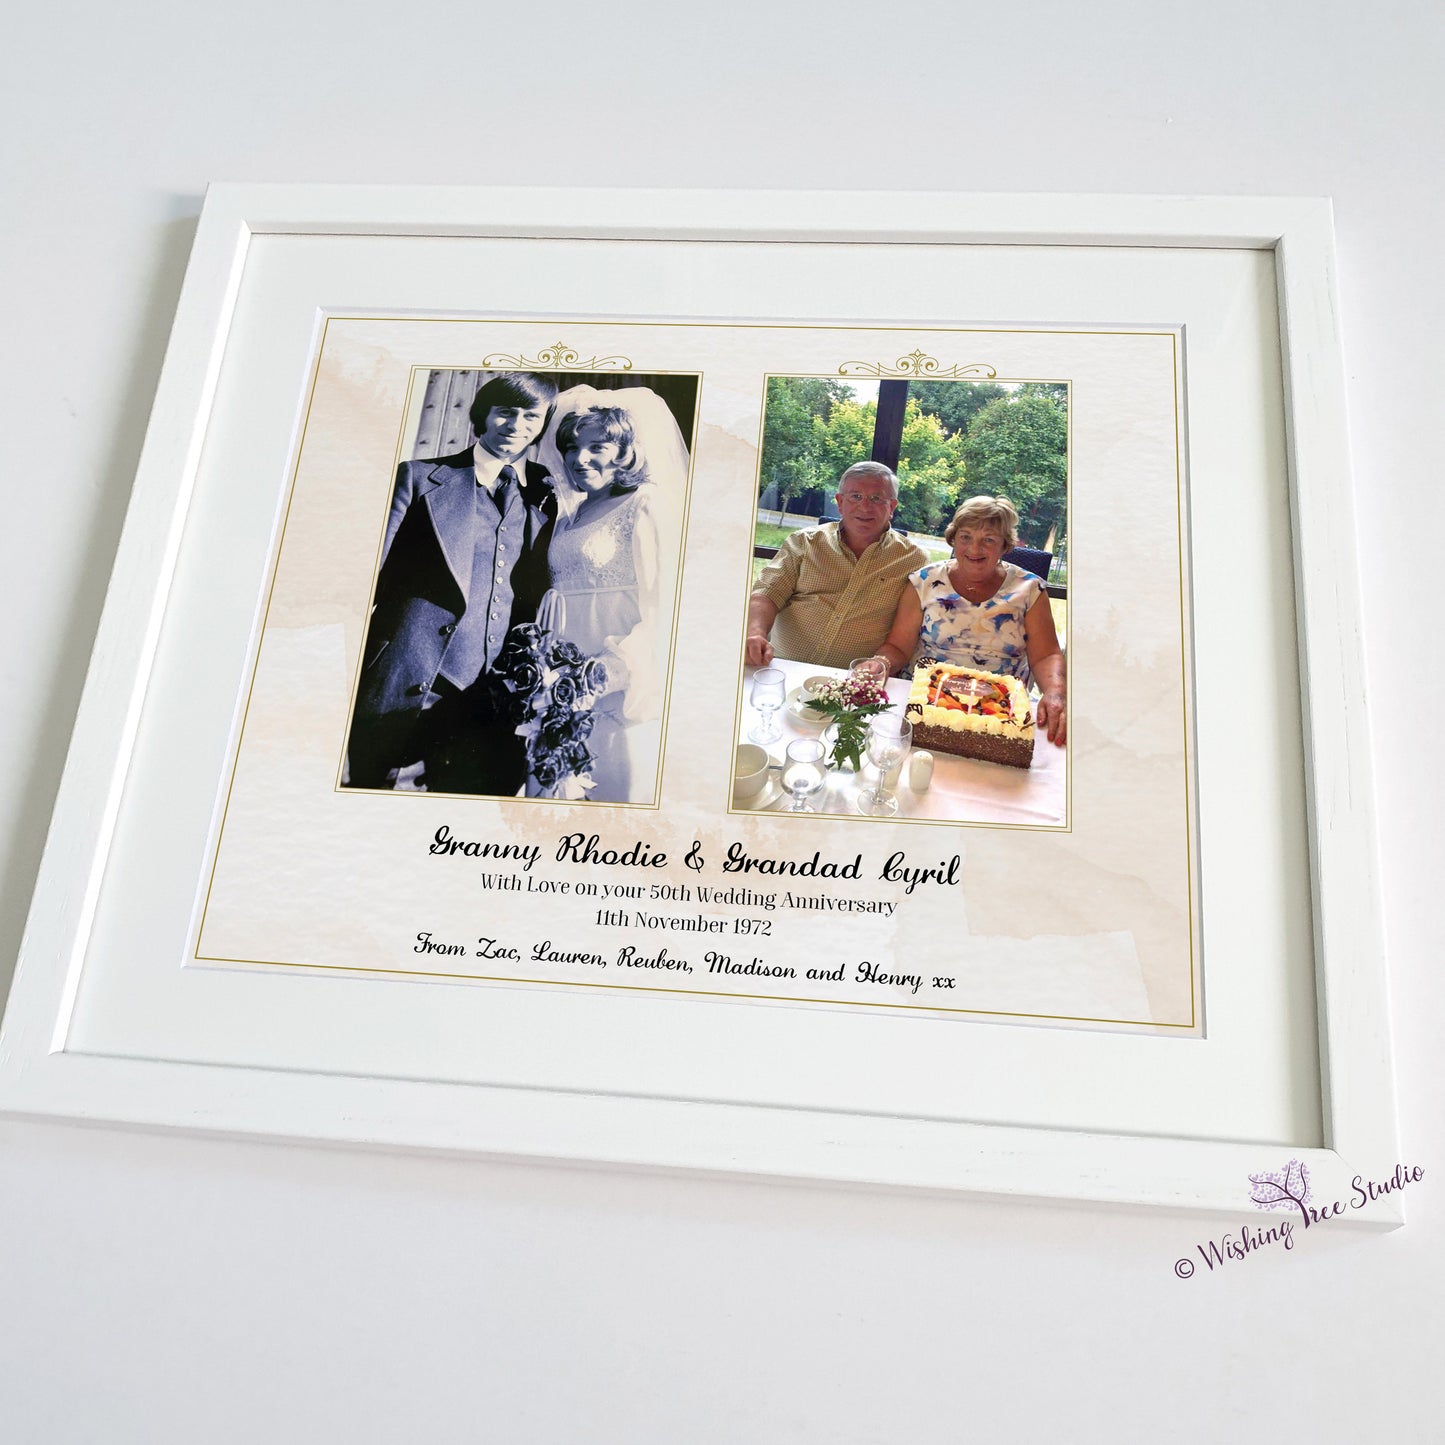 Wedding Anniversary - Then and Now photo frame